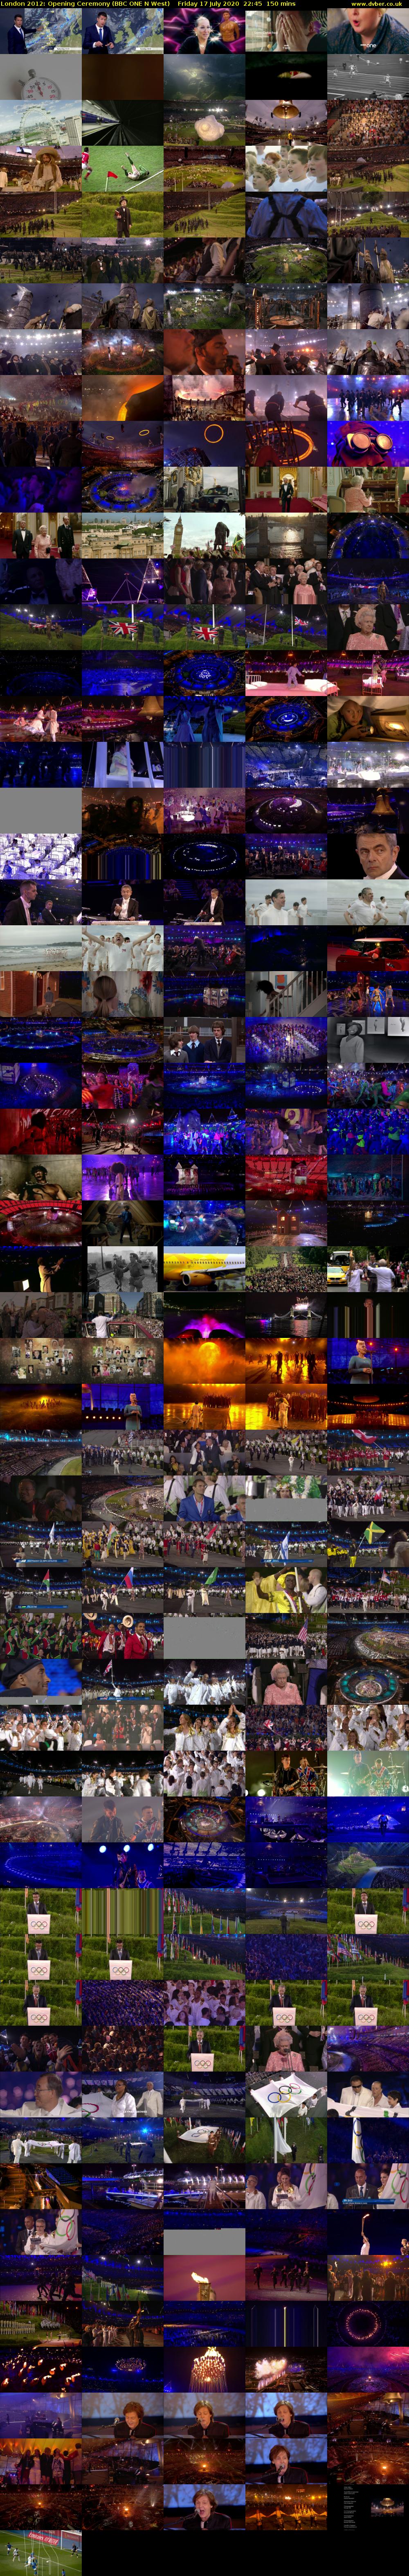 London 2012: Opening Ceremony (BBC ONE N West) Friday 17 July 2020 22:45 - 01:15